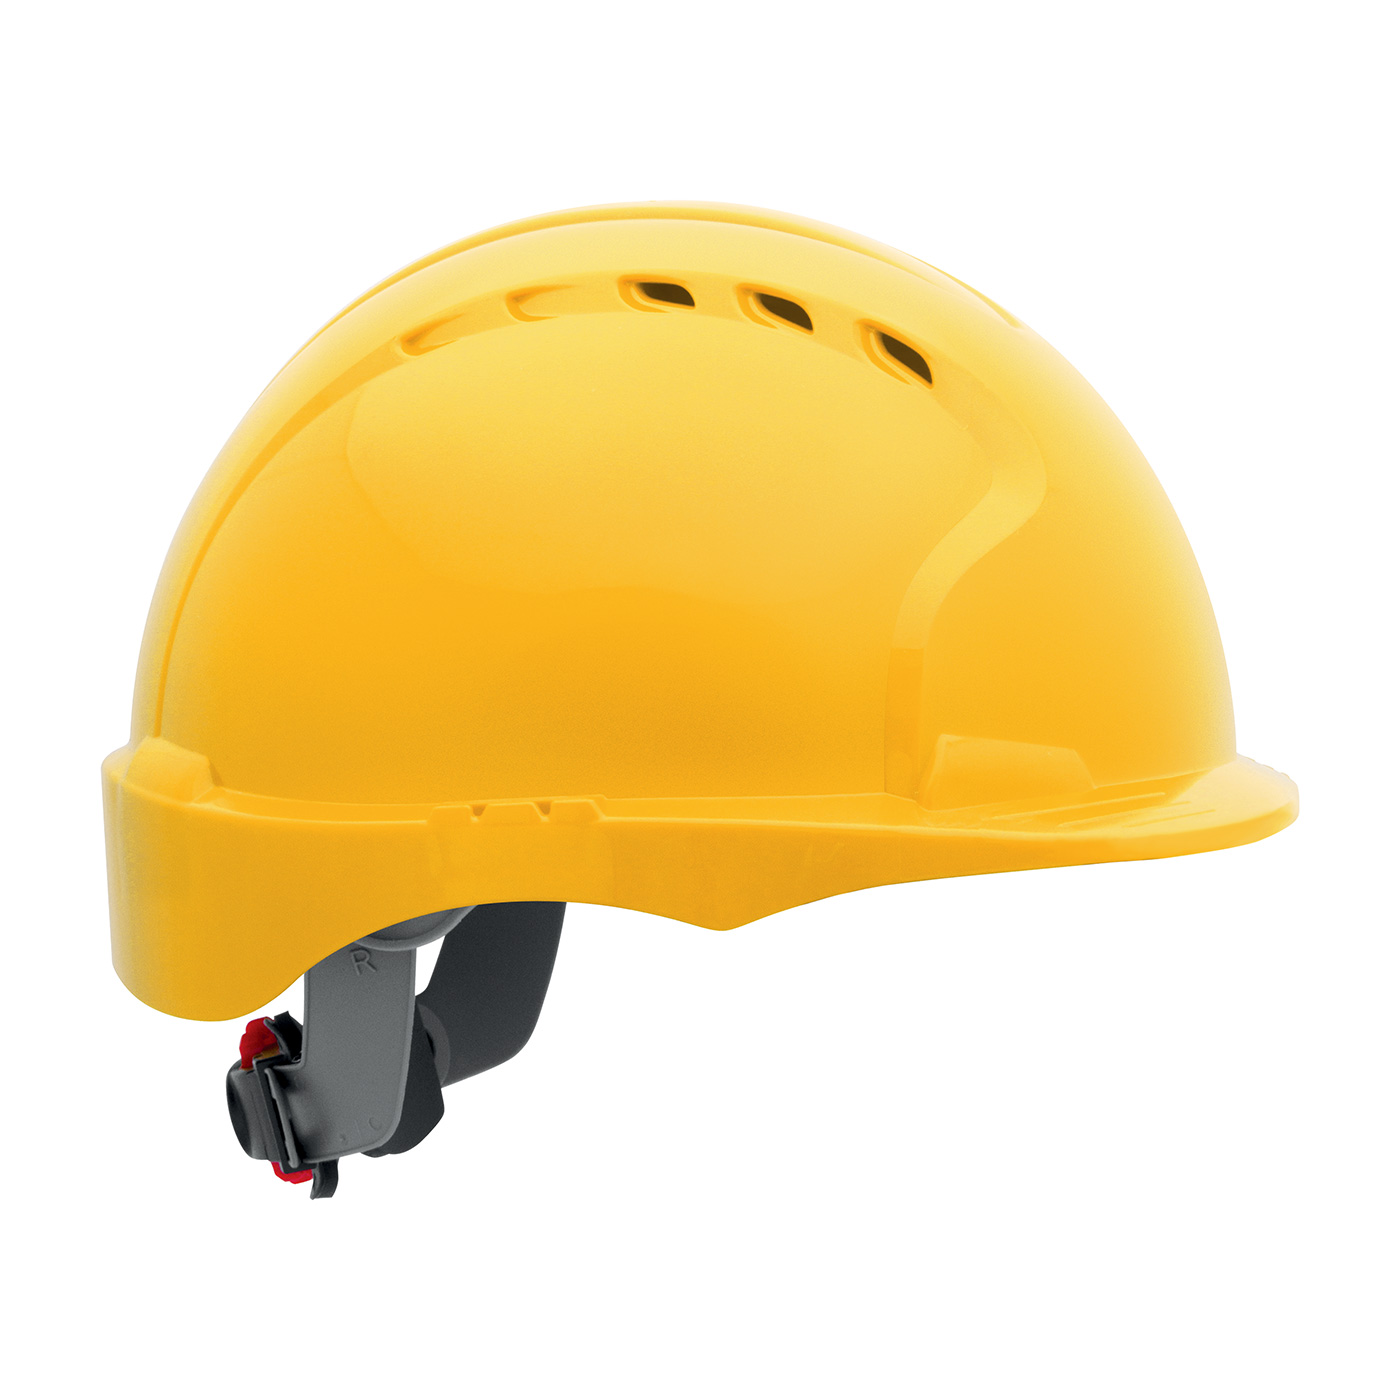 280-EV6151SV PIP® Evolution® Deluxe 6151 Vented, Short Brim Hard Hat with HDPE Shell, 6-Point Polyester Suspension and Wheel Ratchet Adjustment - Yellow